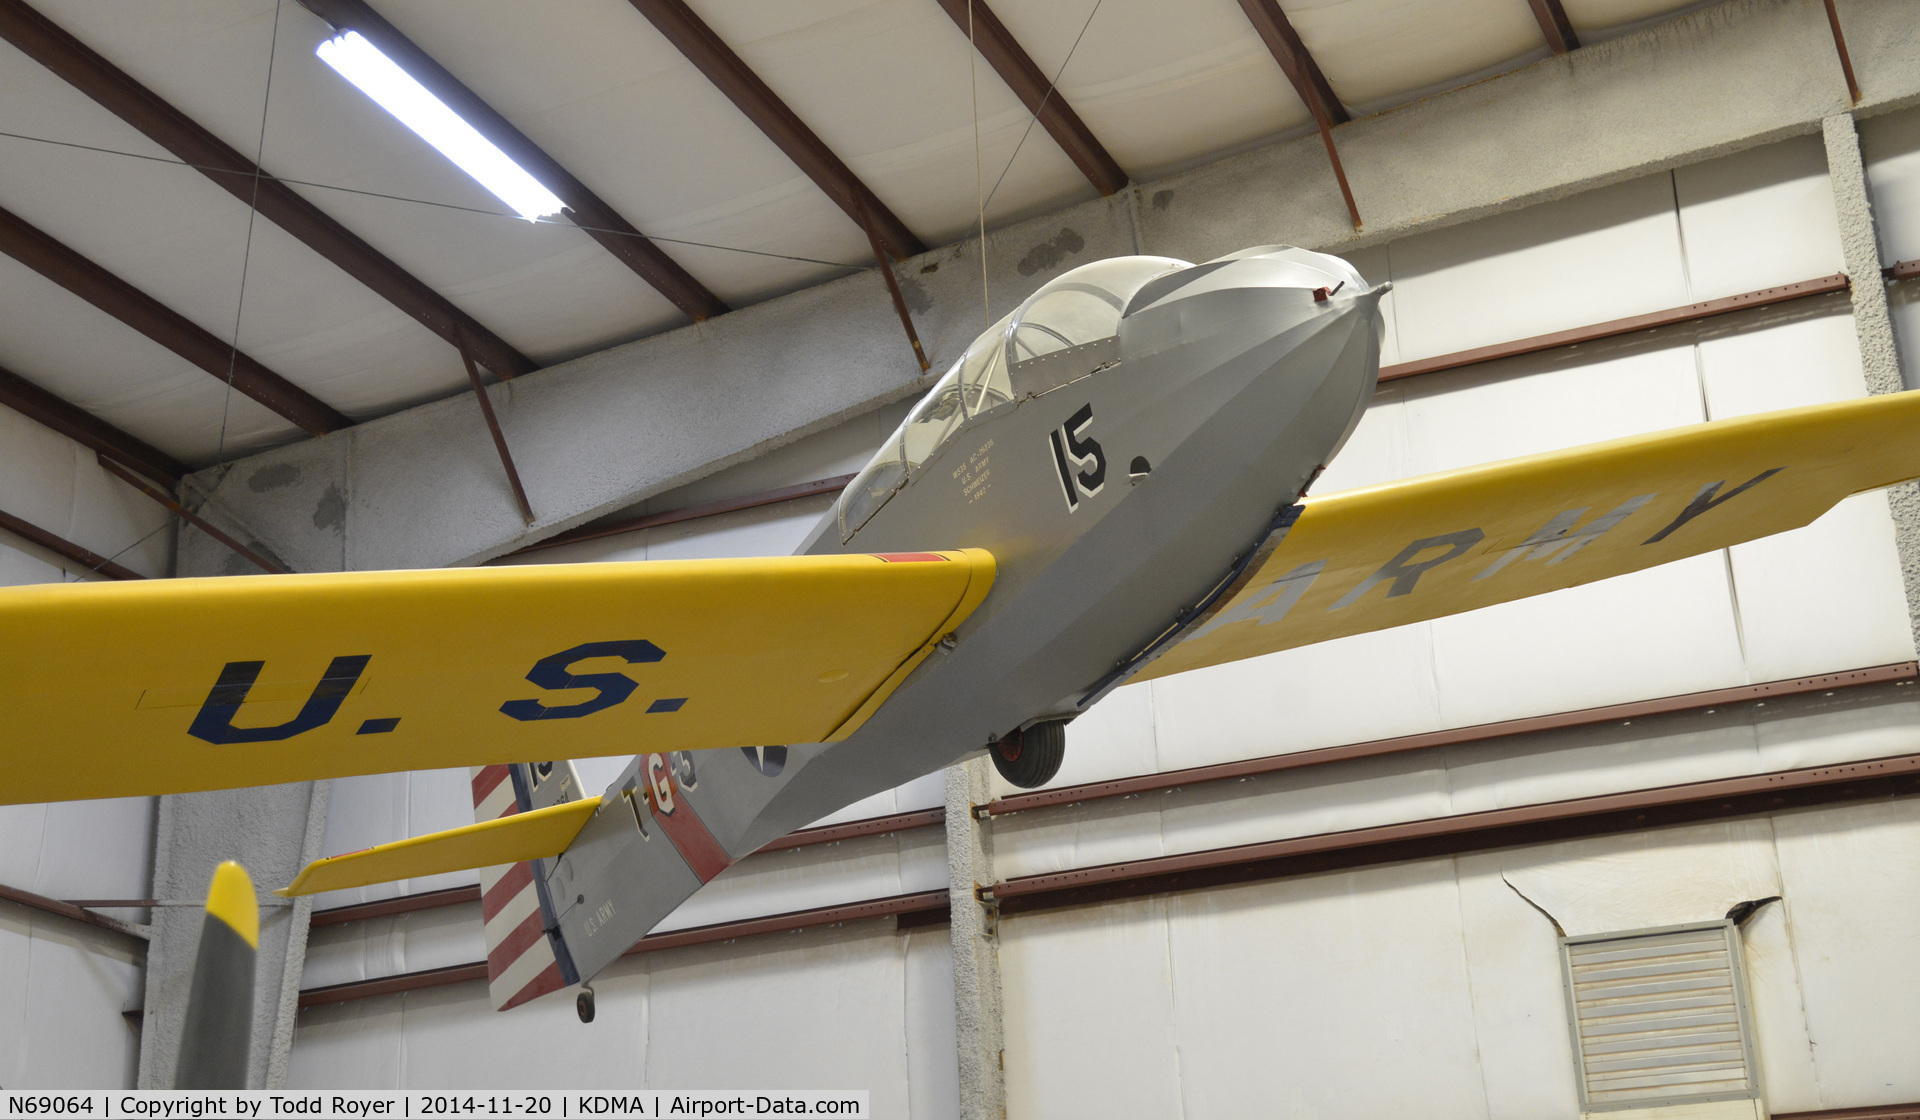 N69064, Schweizer TG-3A C/N 15, On display at the Pima Air and Space Museum